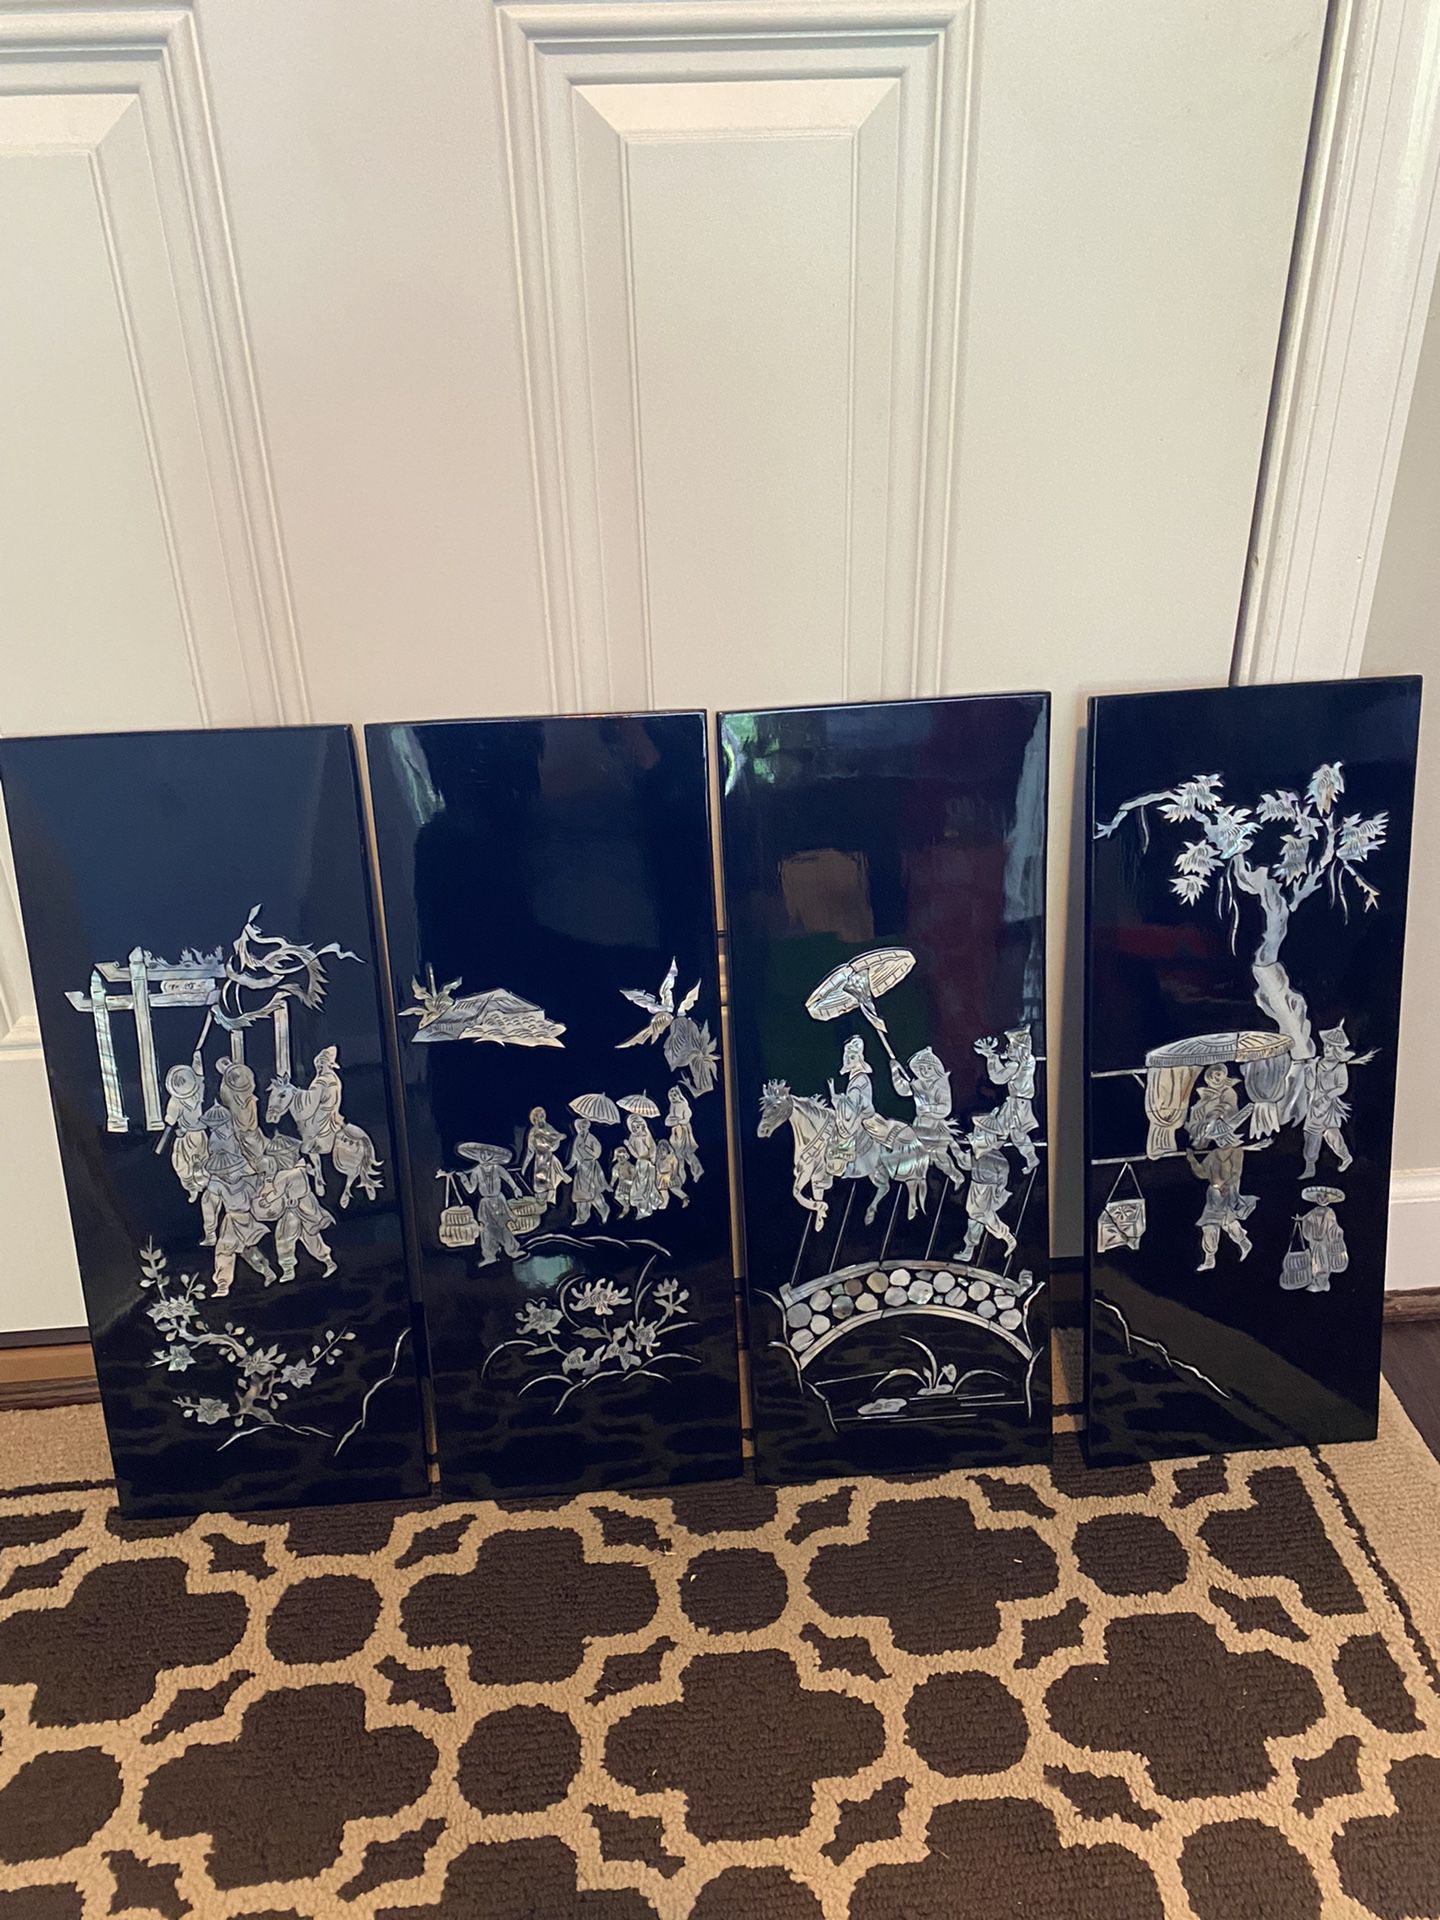 4 Vintage Asian Black Lacquer Mother of Pearl Wall Panels Art Chinese